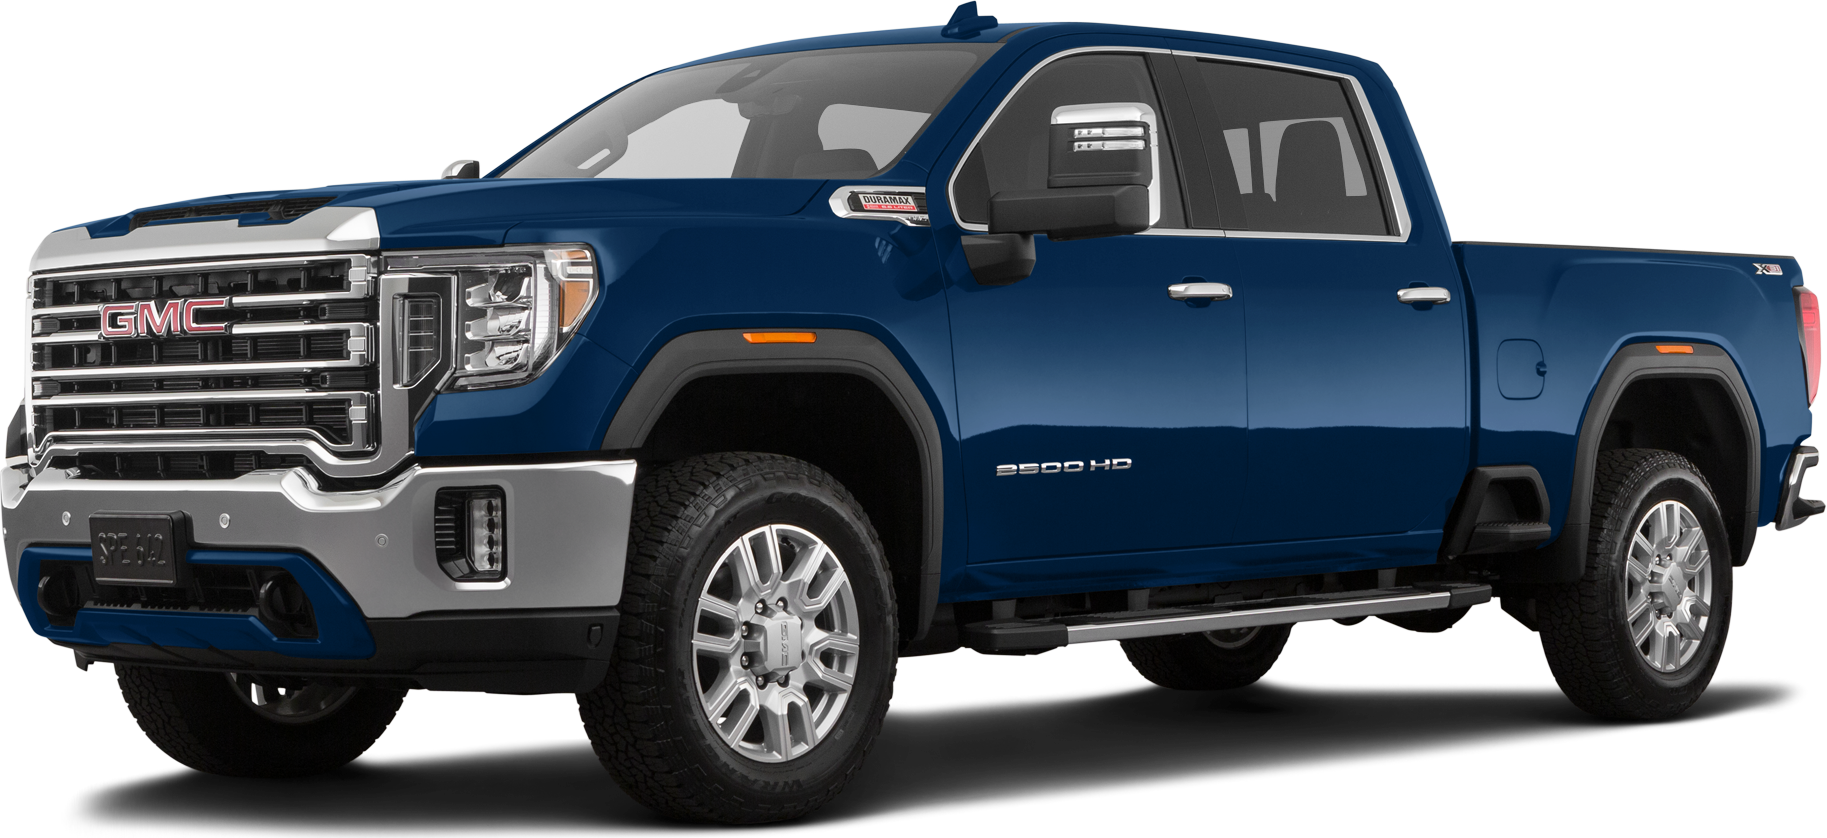 2021 Gmc Sierra 2500 Hd Crew Cab Price Value Ratings And Reviews